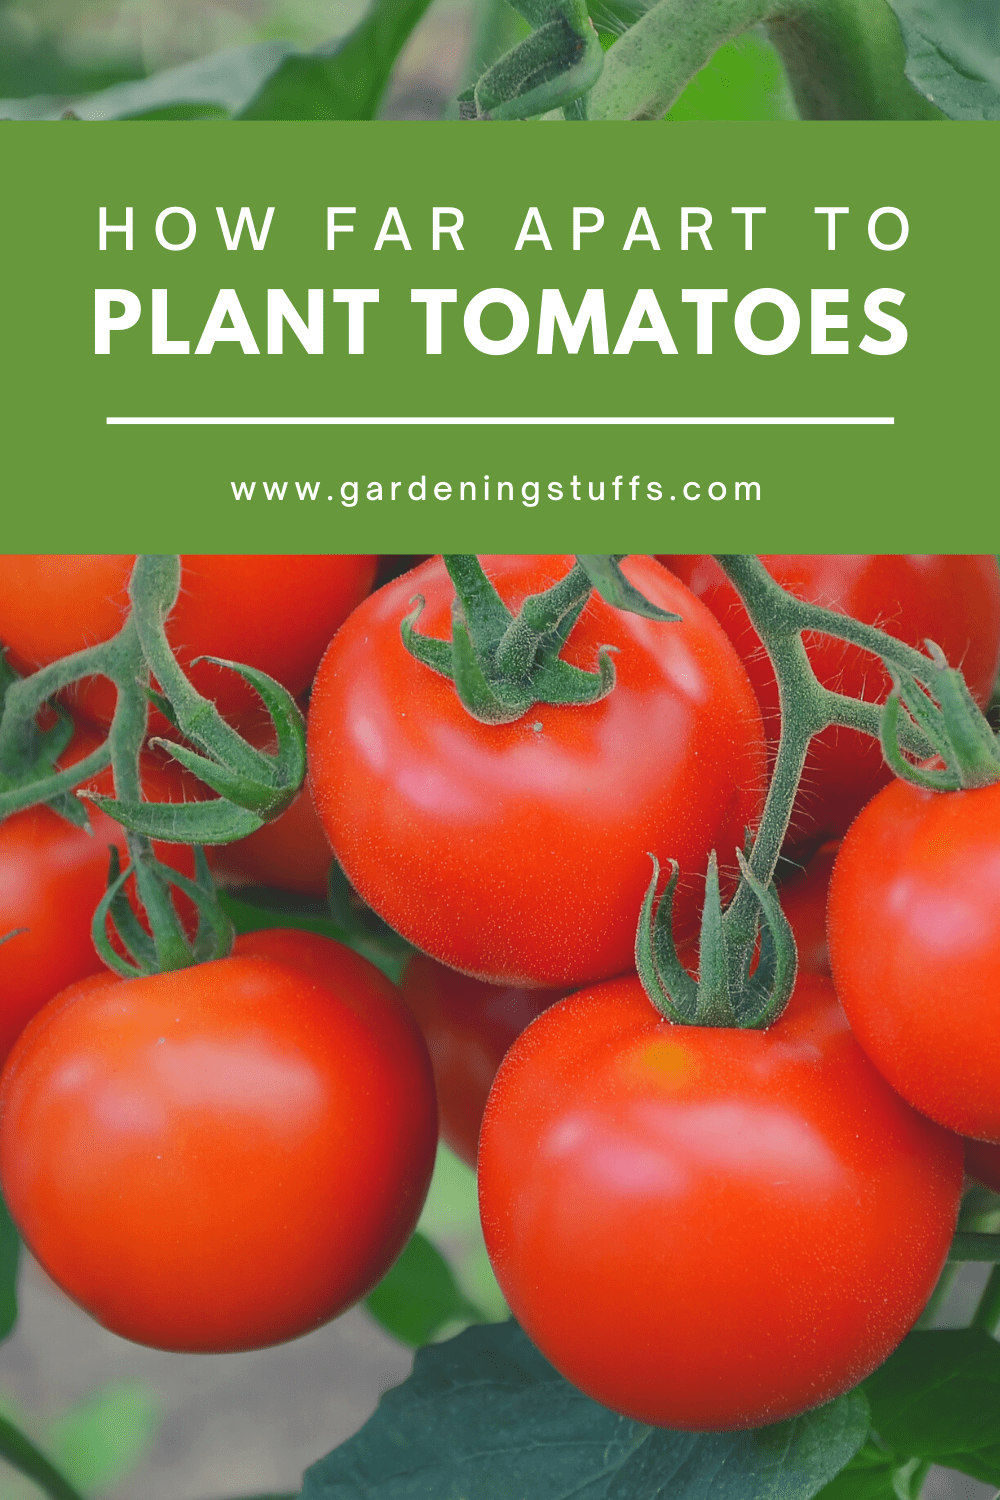 Growing tomatoes is both simple and rewarding but, if you plan on planting more than one plant, the question of proper spacing may have crossed your mind. read on to find out how far apart you should be planting your particular tomatoes.